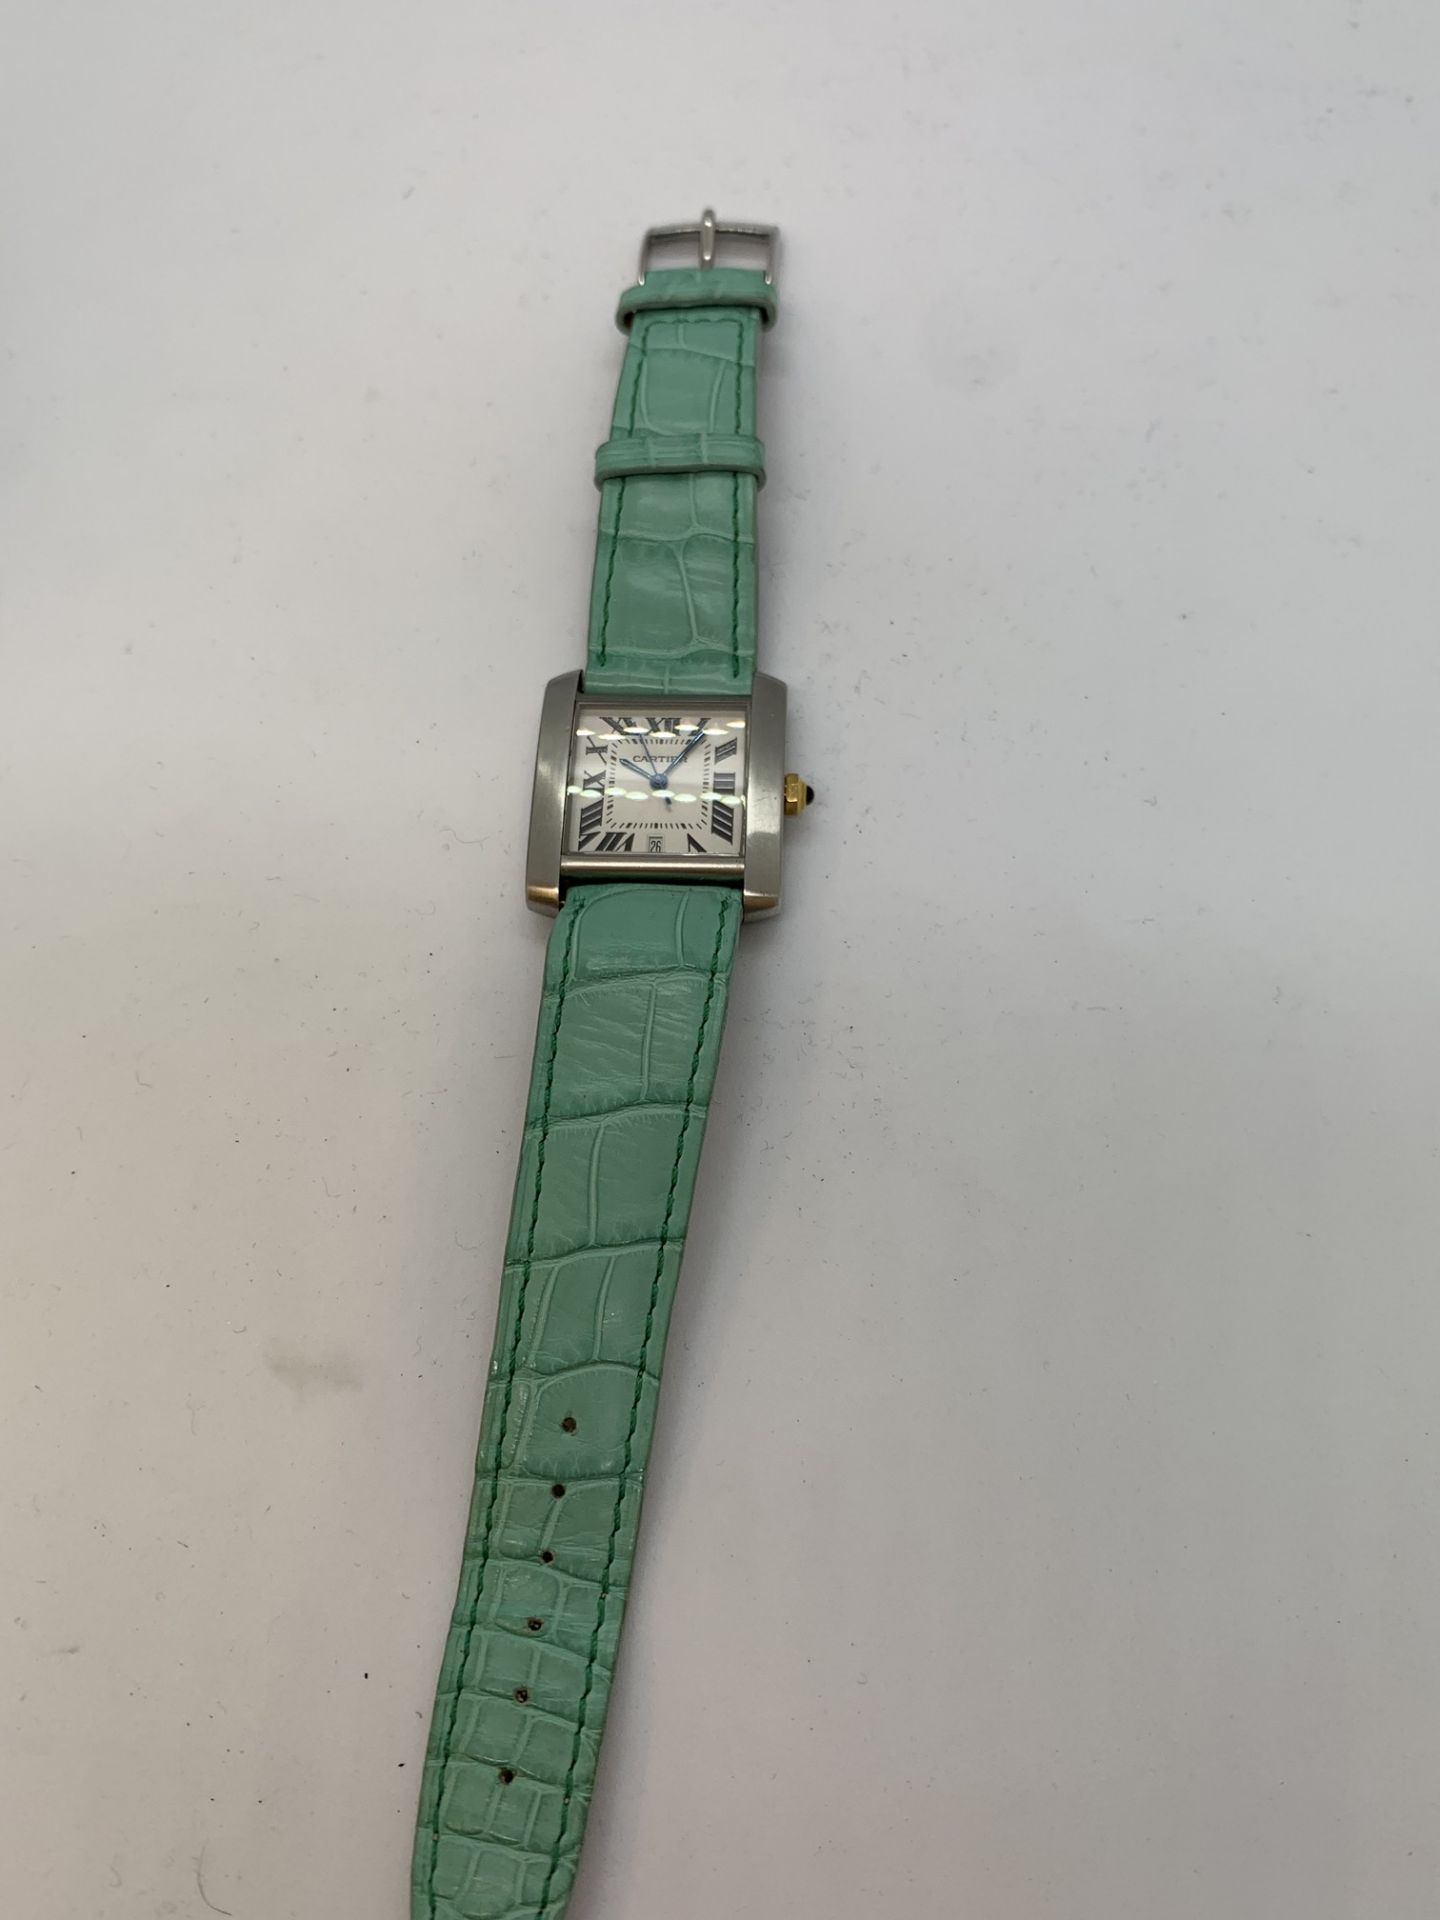 CARTIER 2302 AUTOMATIC WATCH - LEATHER STRAP - Image 3 of 3